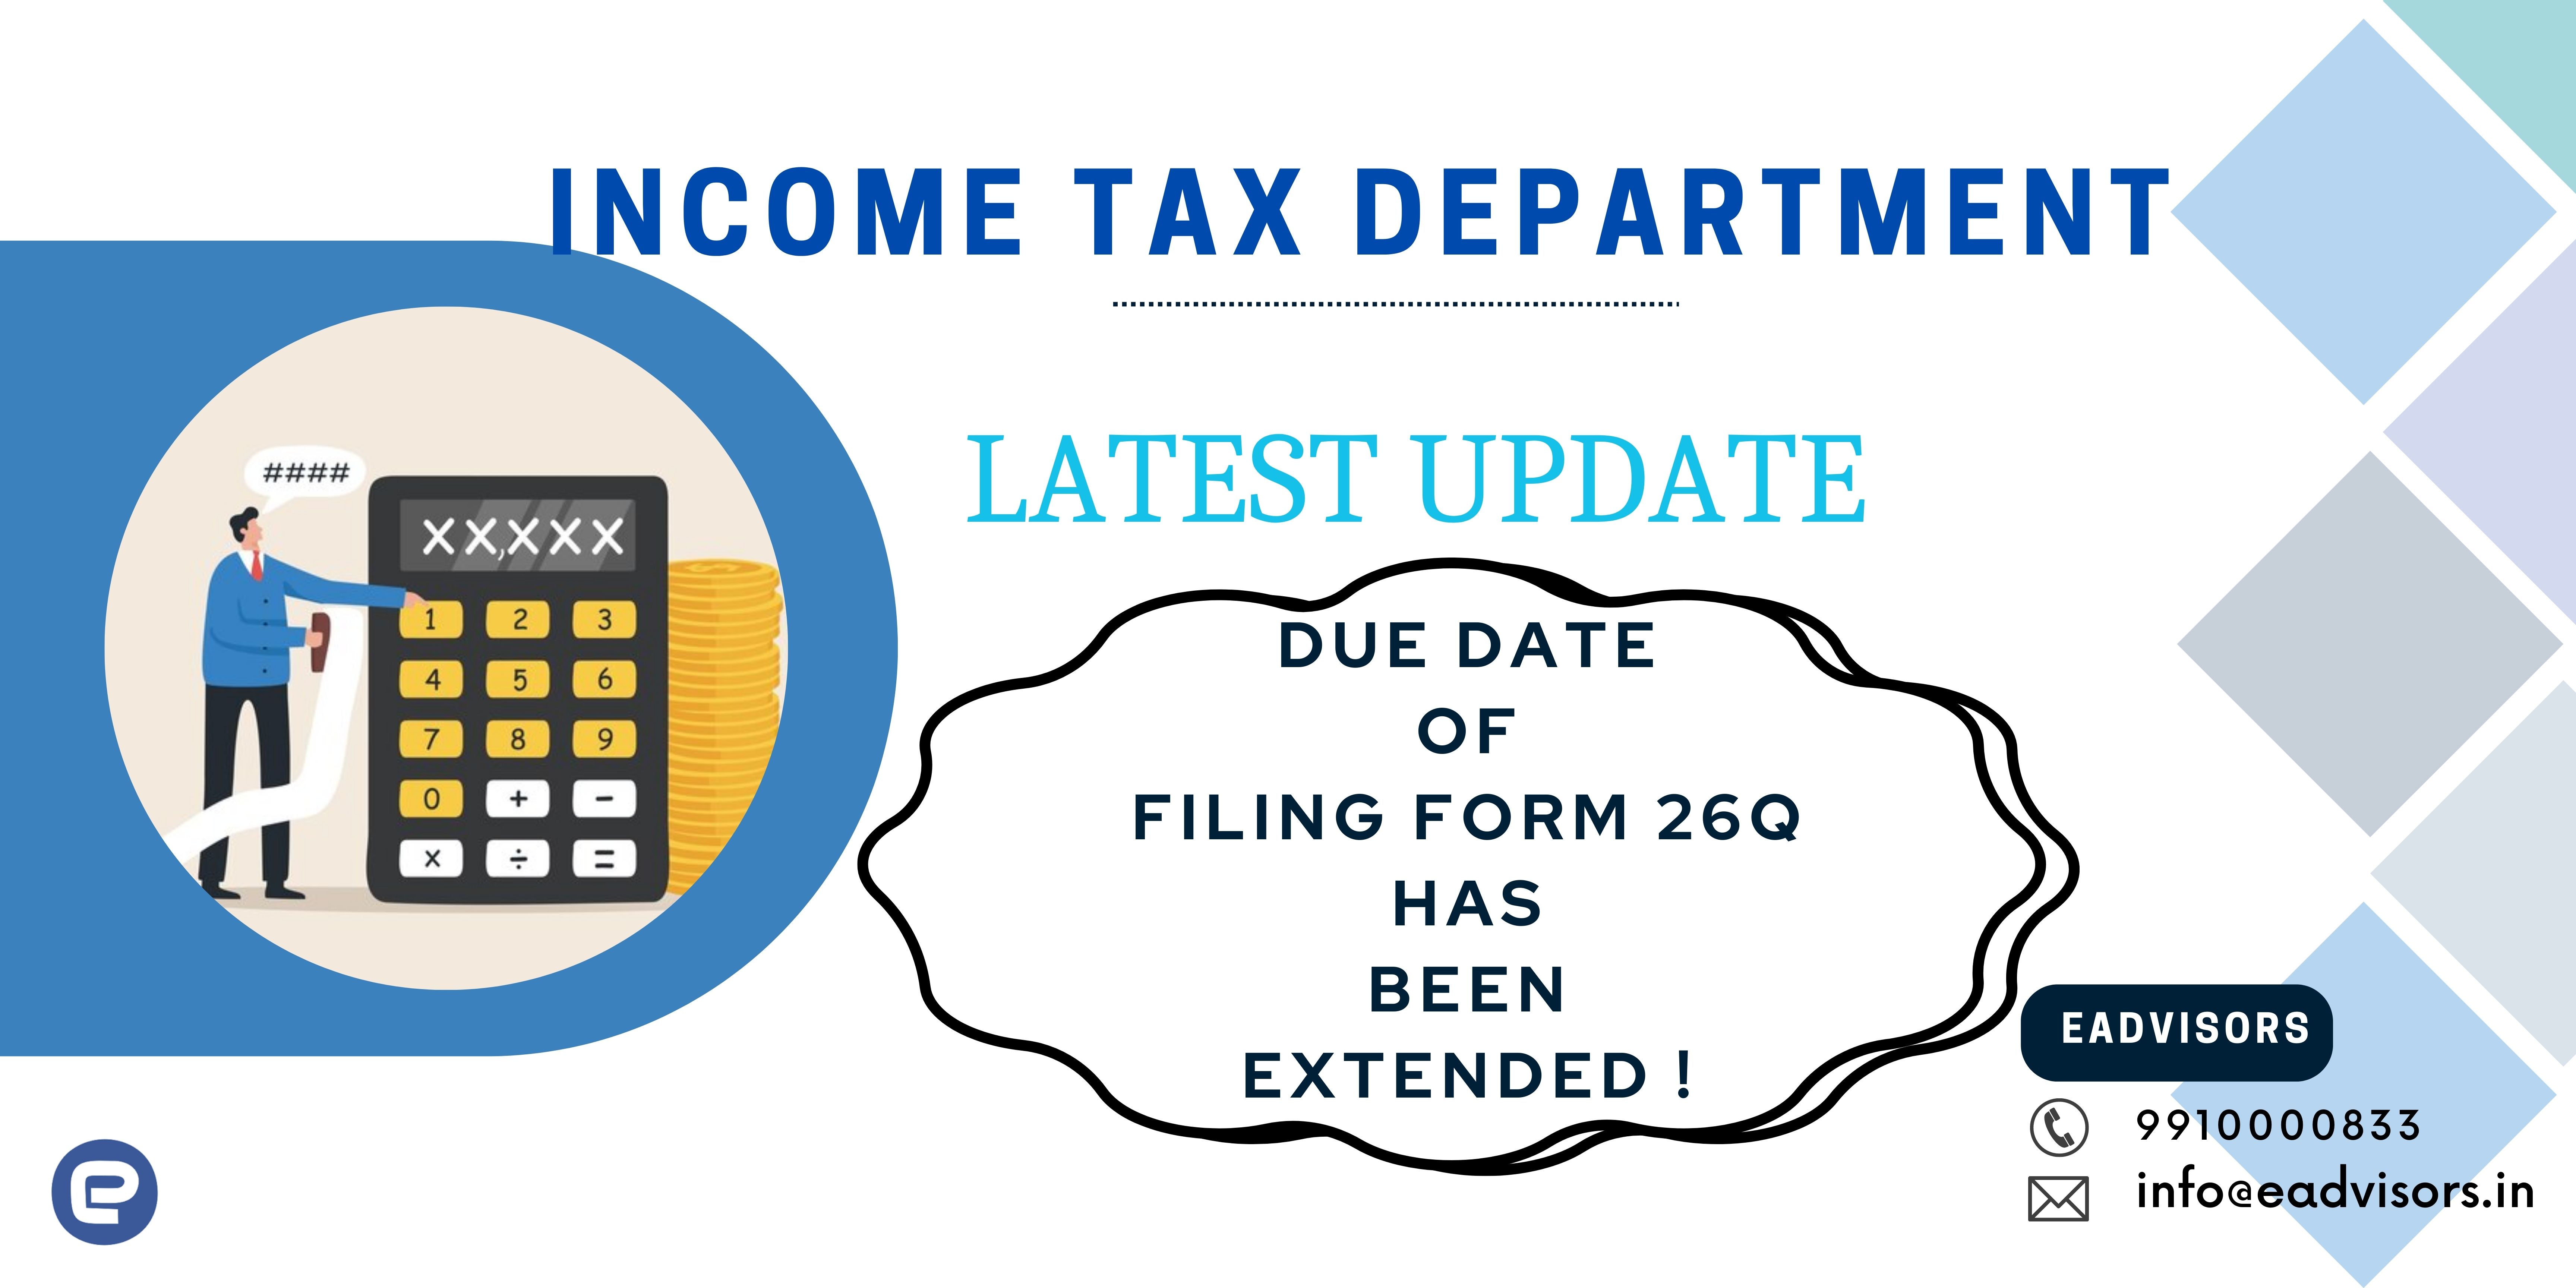 Due Date of Filing Form 26Q extended